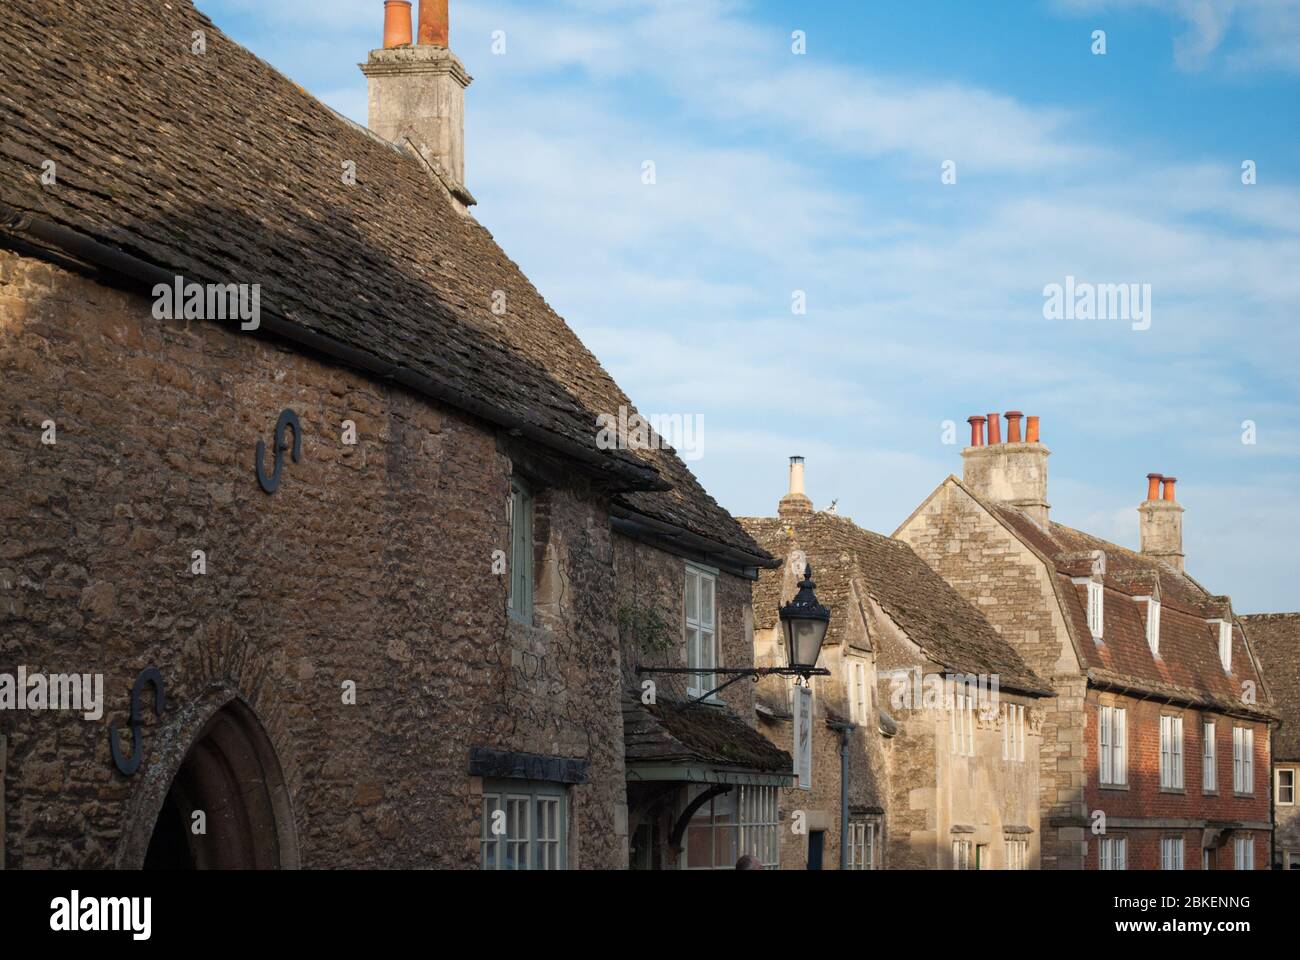 Conservation Heritage Preservation Old English Village Cotswolds Cotswold Stone Buildings Architecture Lacock Village Hither Way, Lacock, SN15 Stock Photo